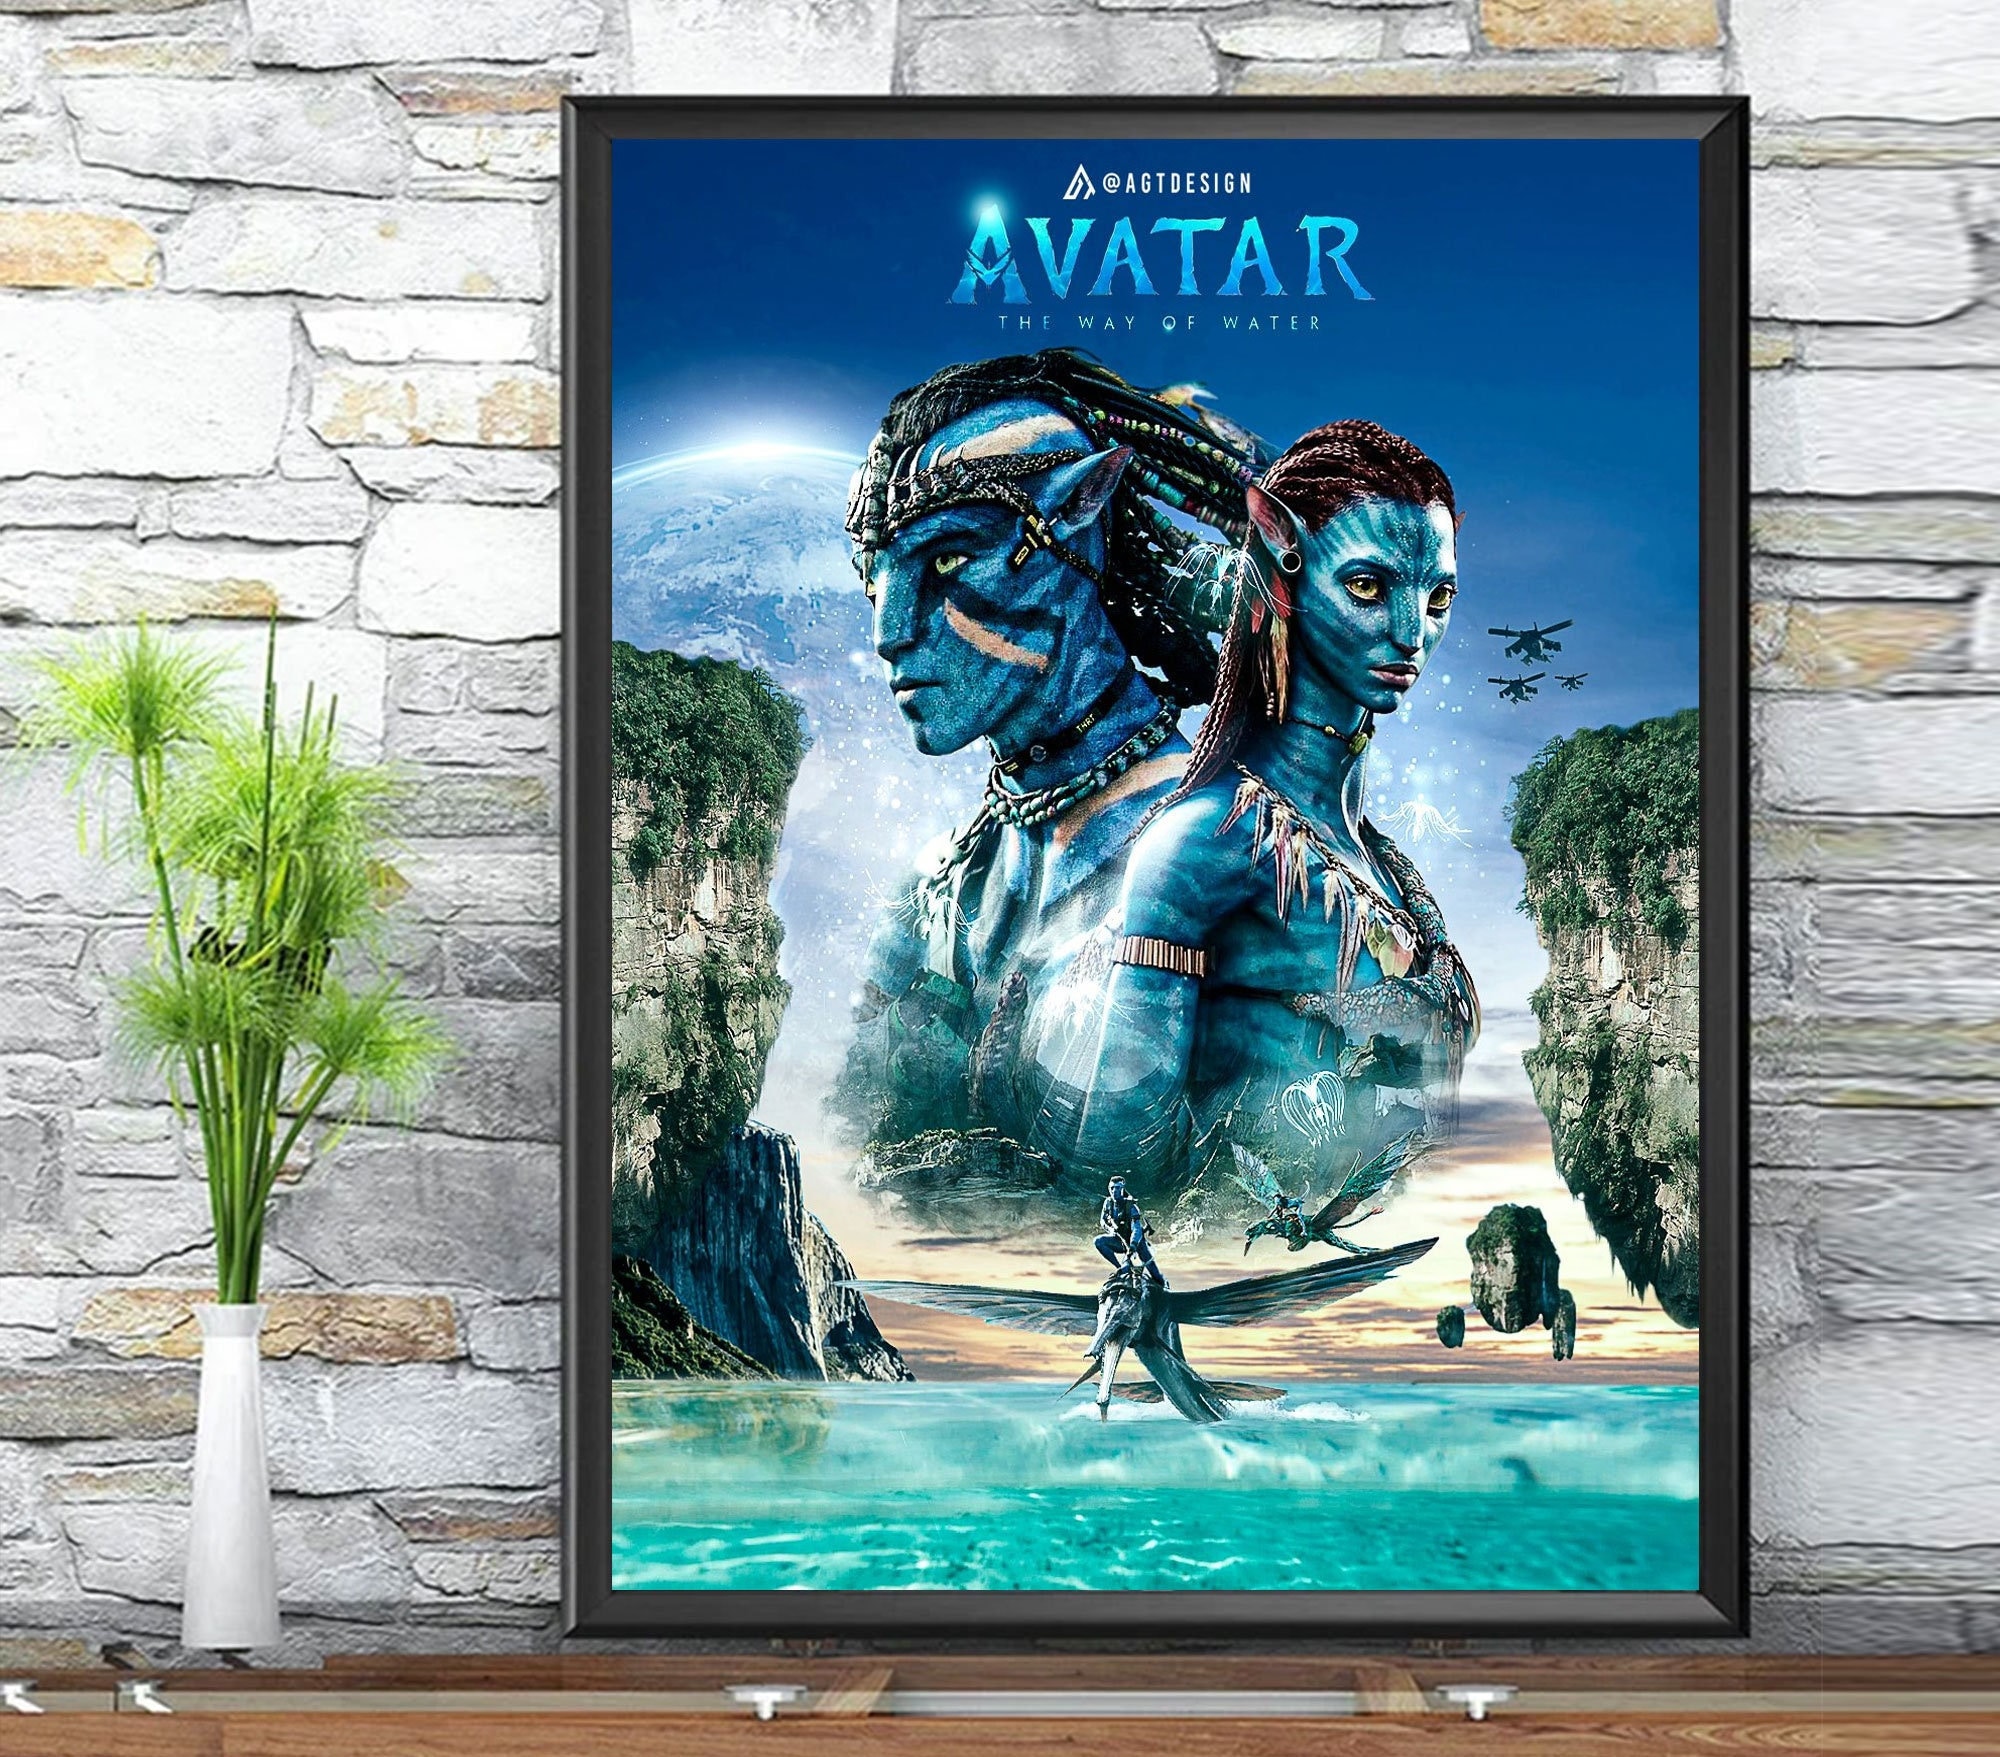 Avatar The Way of Water Poster, Avatar 2 Poster, Avatar Movie 2022 Poster